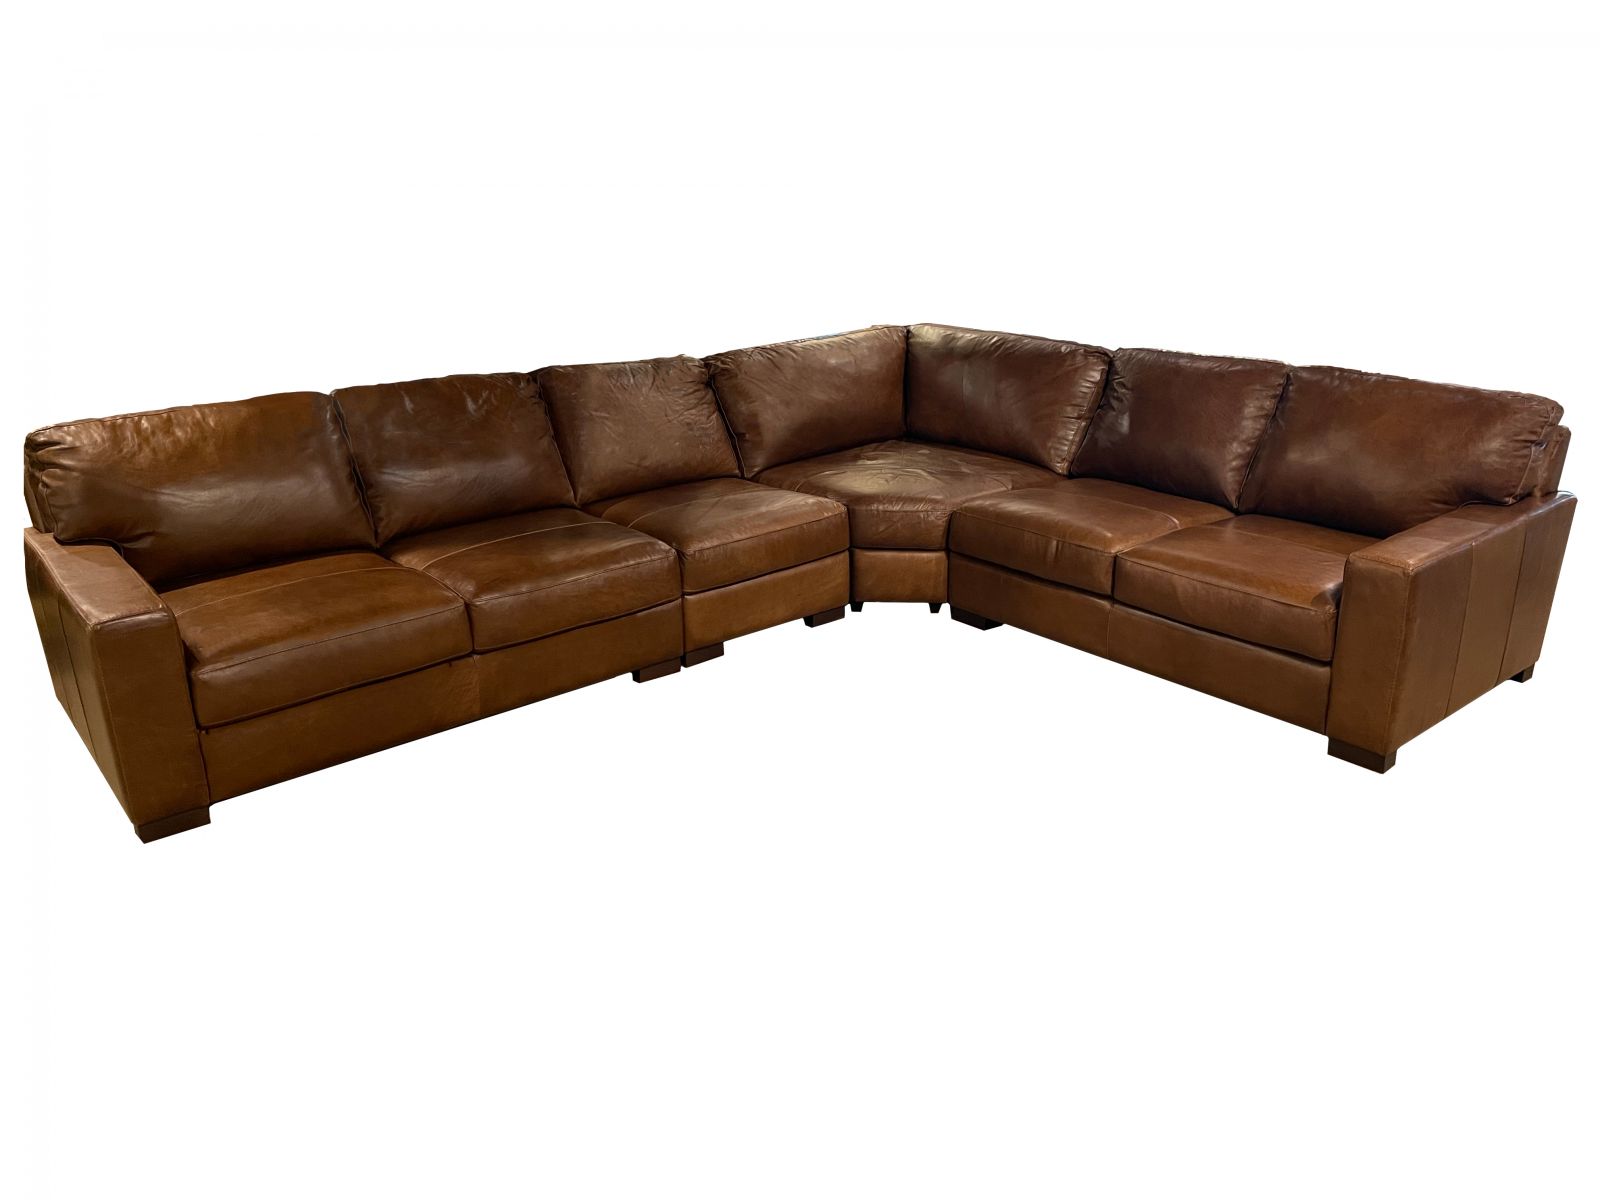 Johnston 4 Piece Leather Sectional